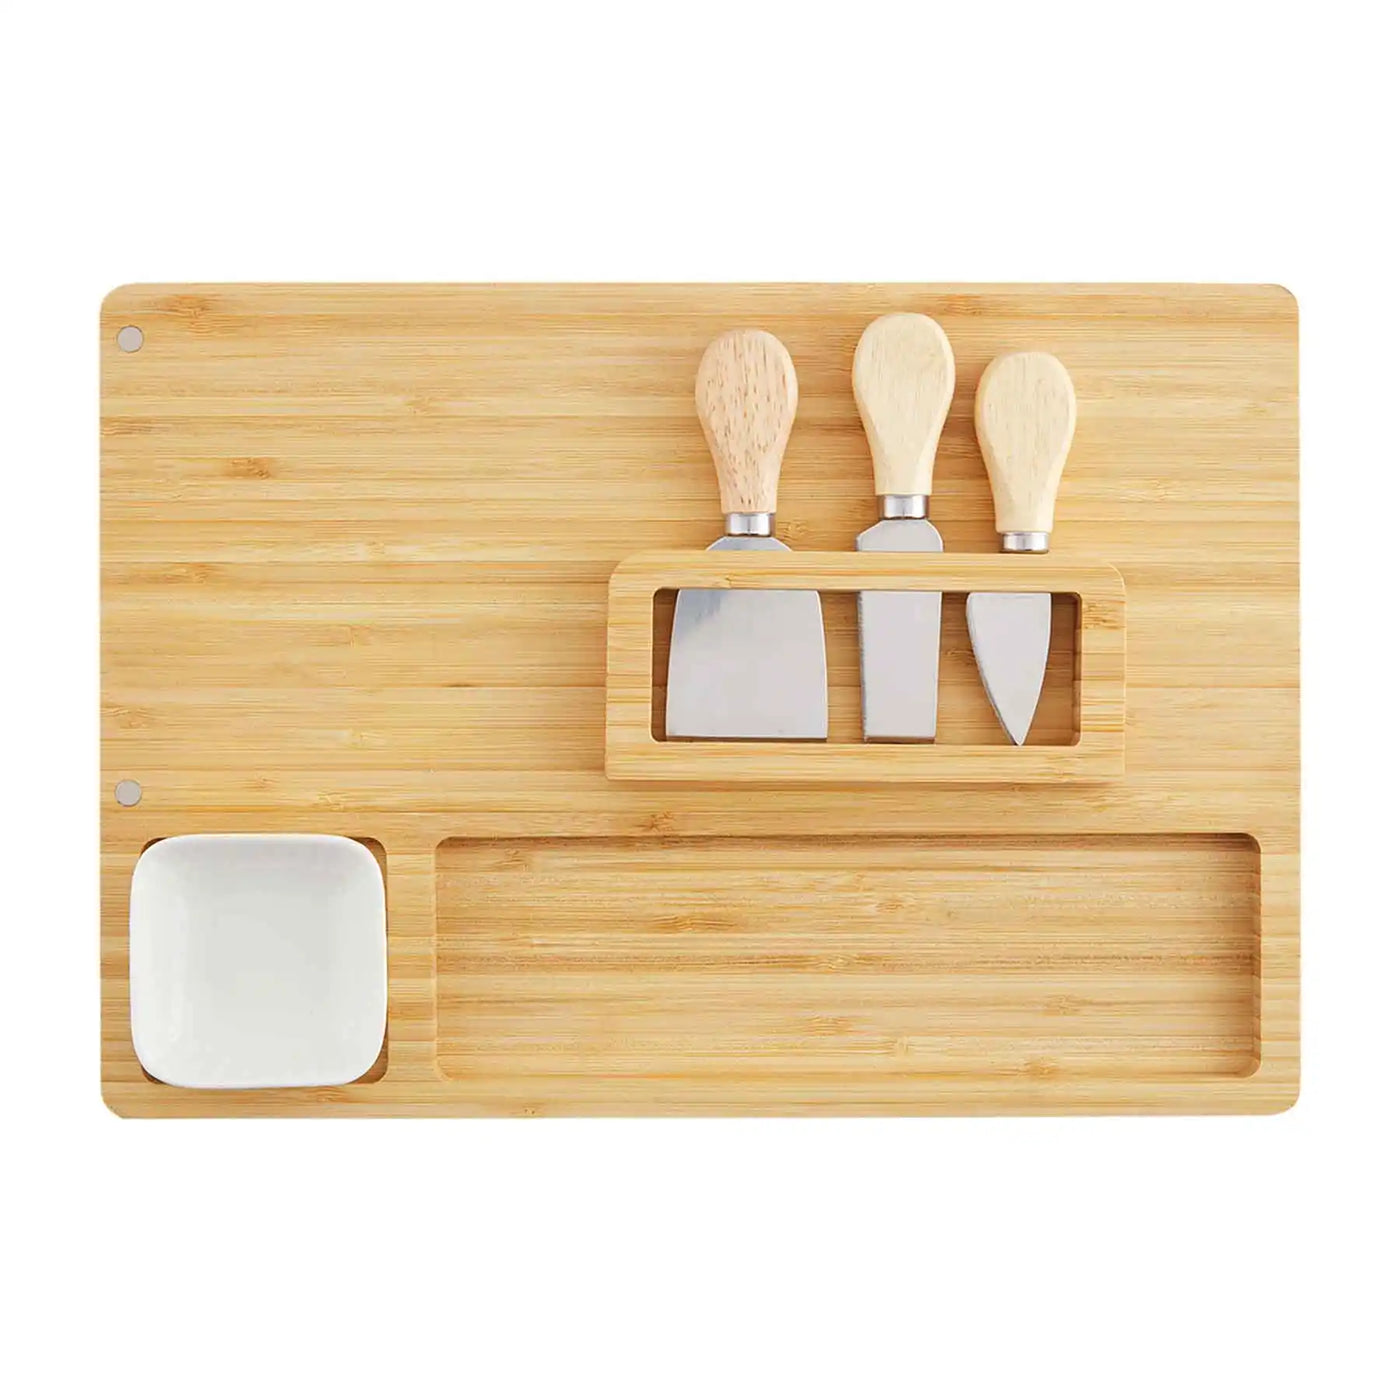 Board And Utensil Set